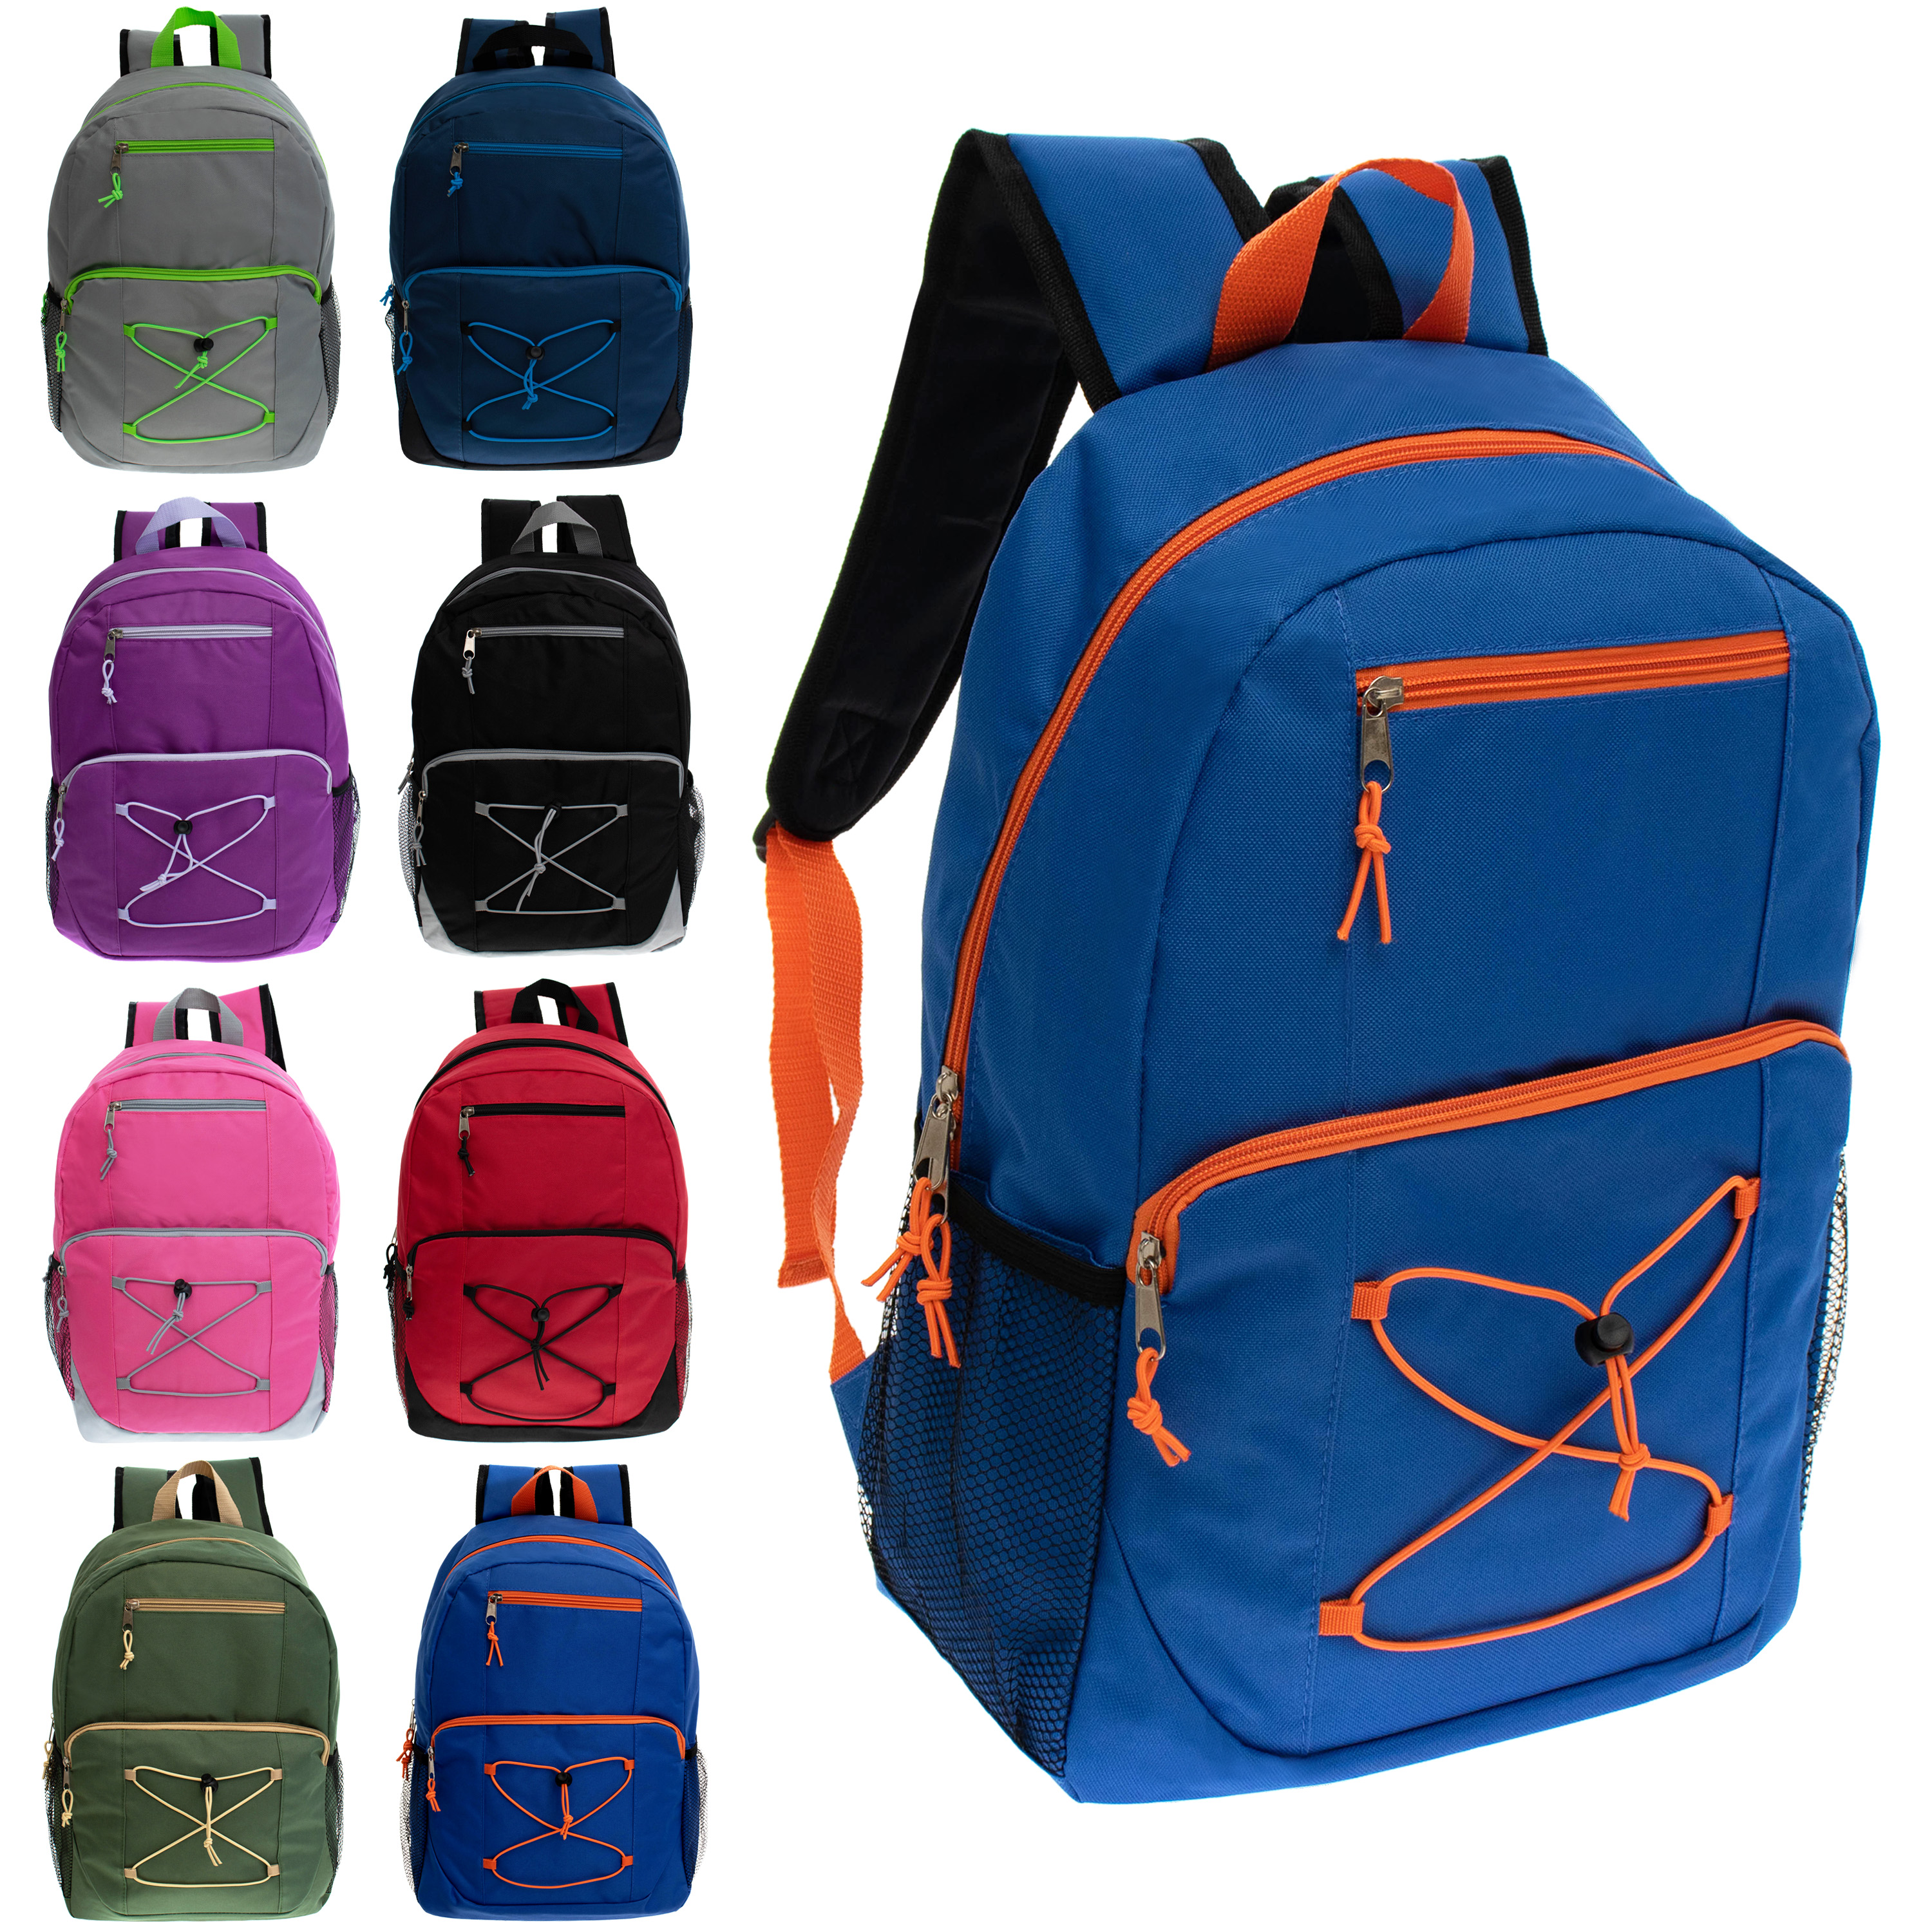 ''17'''' Two Tone Bungee BACKPACKs w/ Adjustable Padded Straps and Mesh Cargo Pockets - Assorted Colors